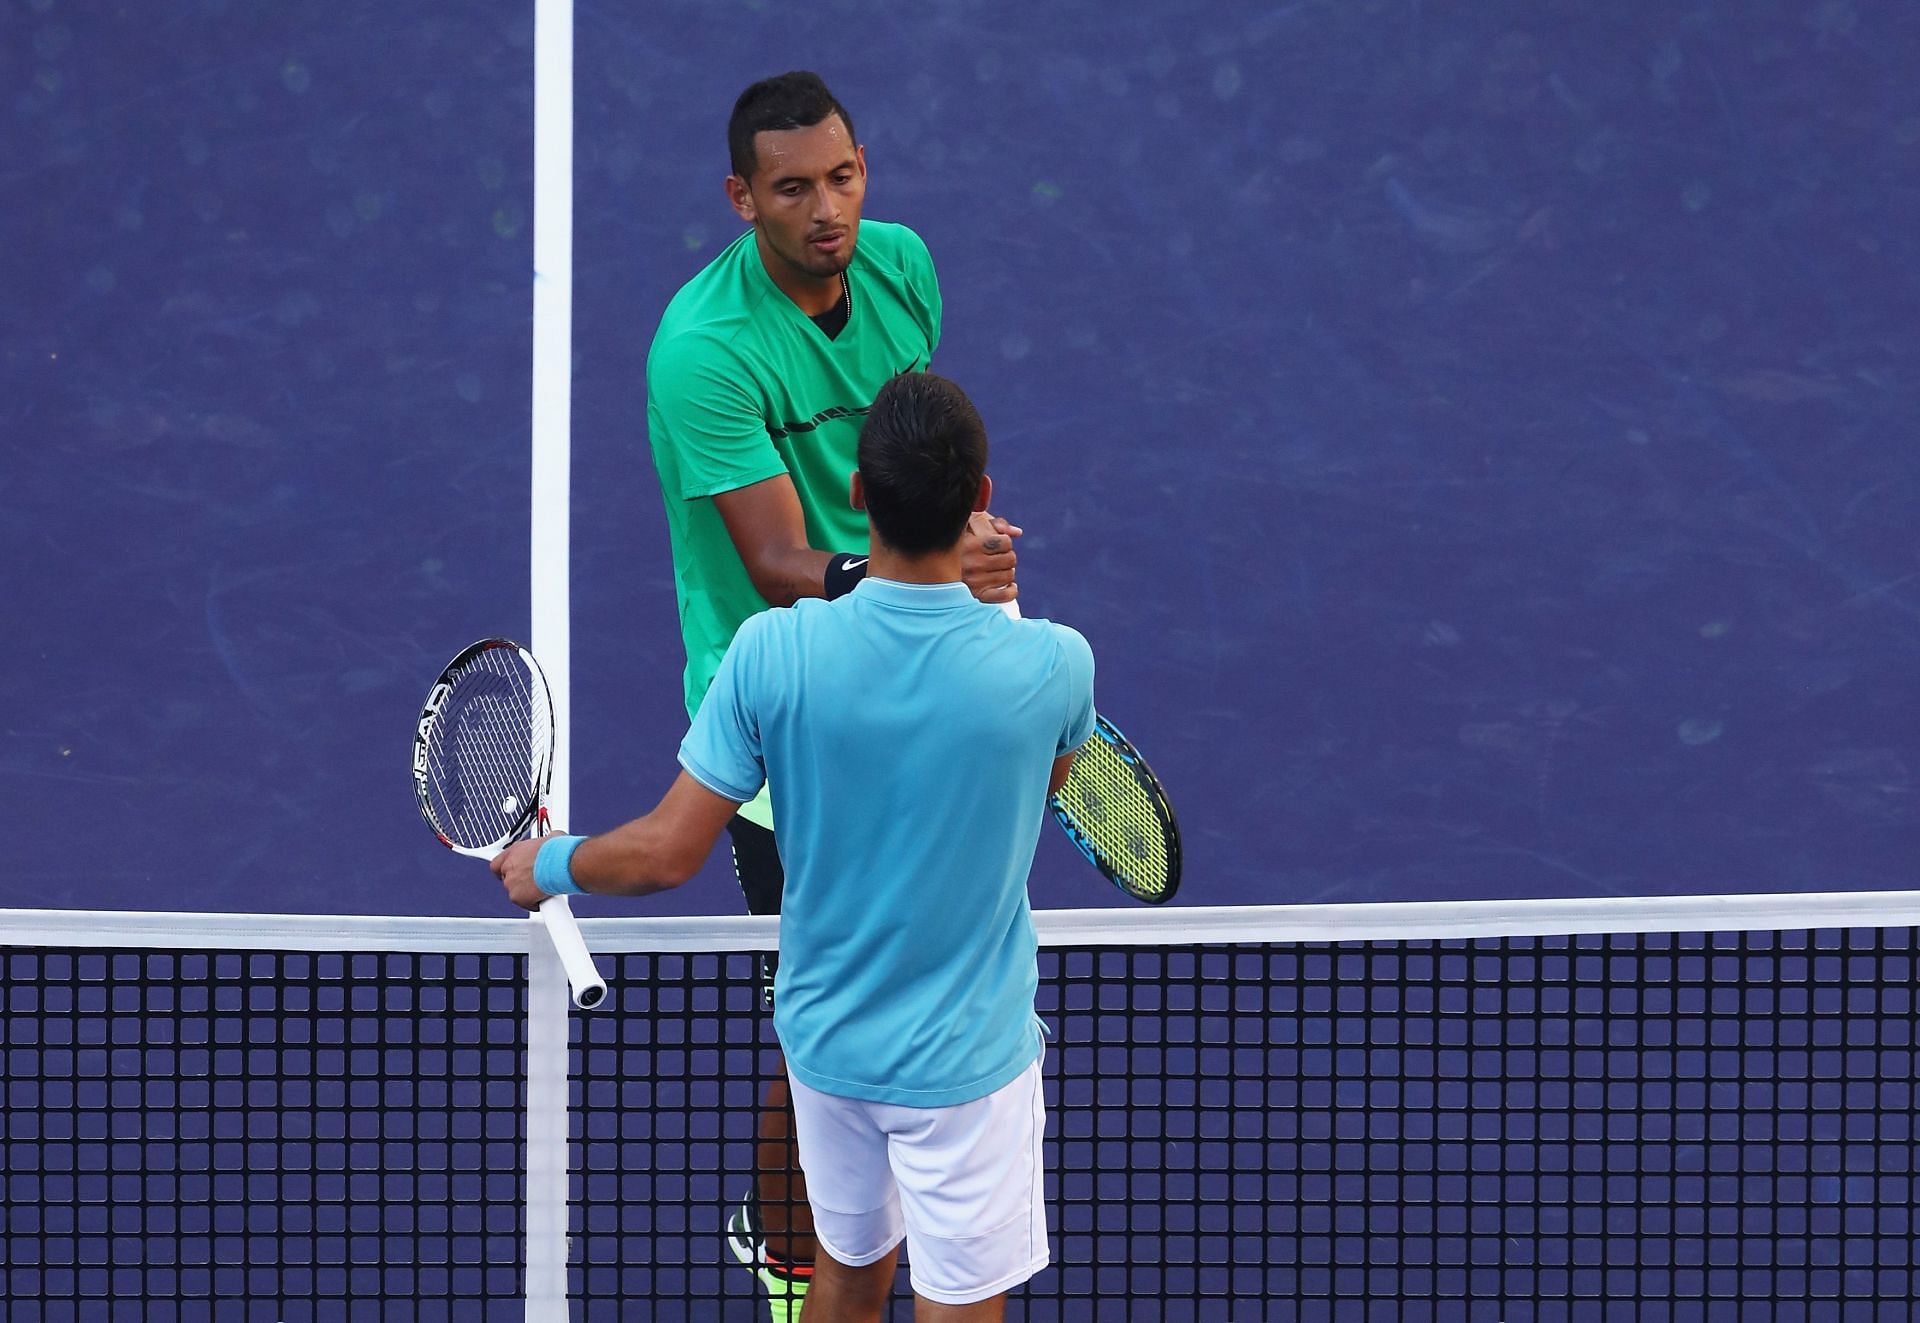 Nick Kyrgios and Novak Djokovic will fight for the Wimbledon title on Sunday.